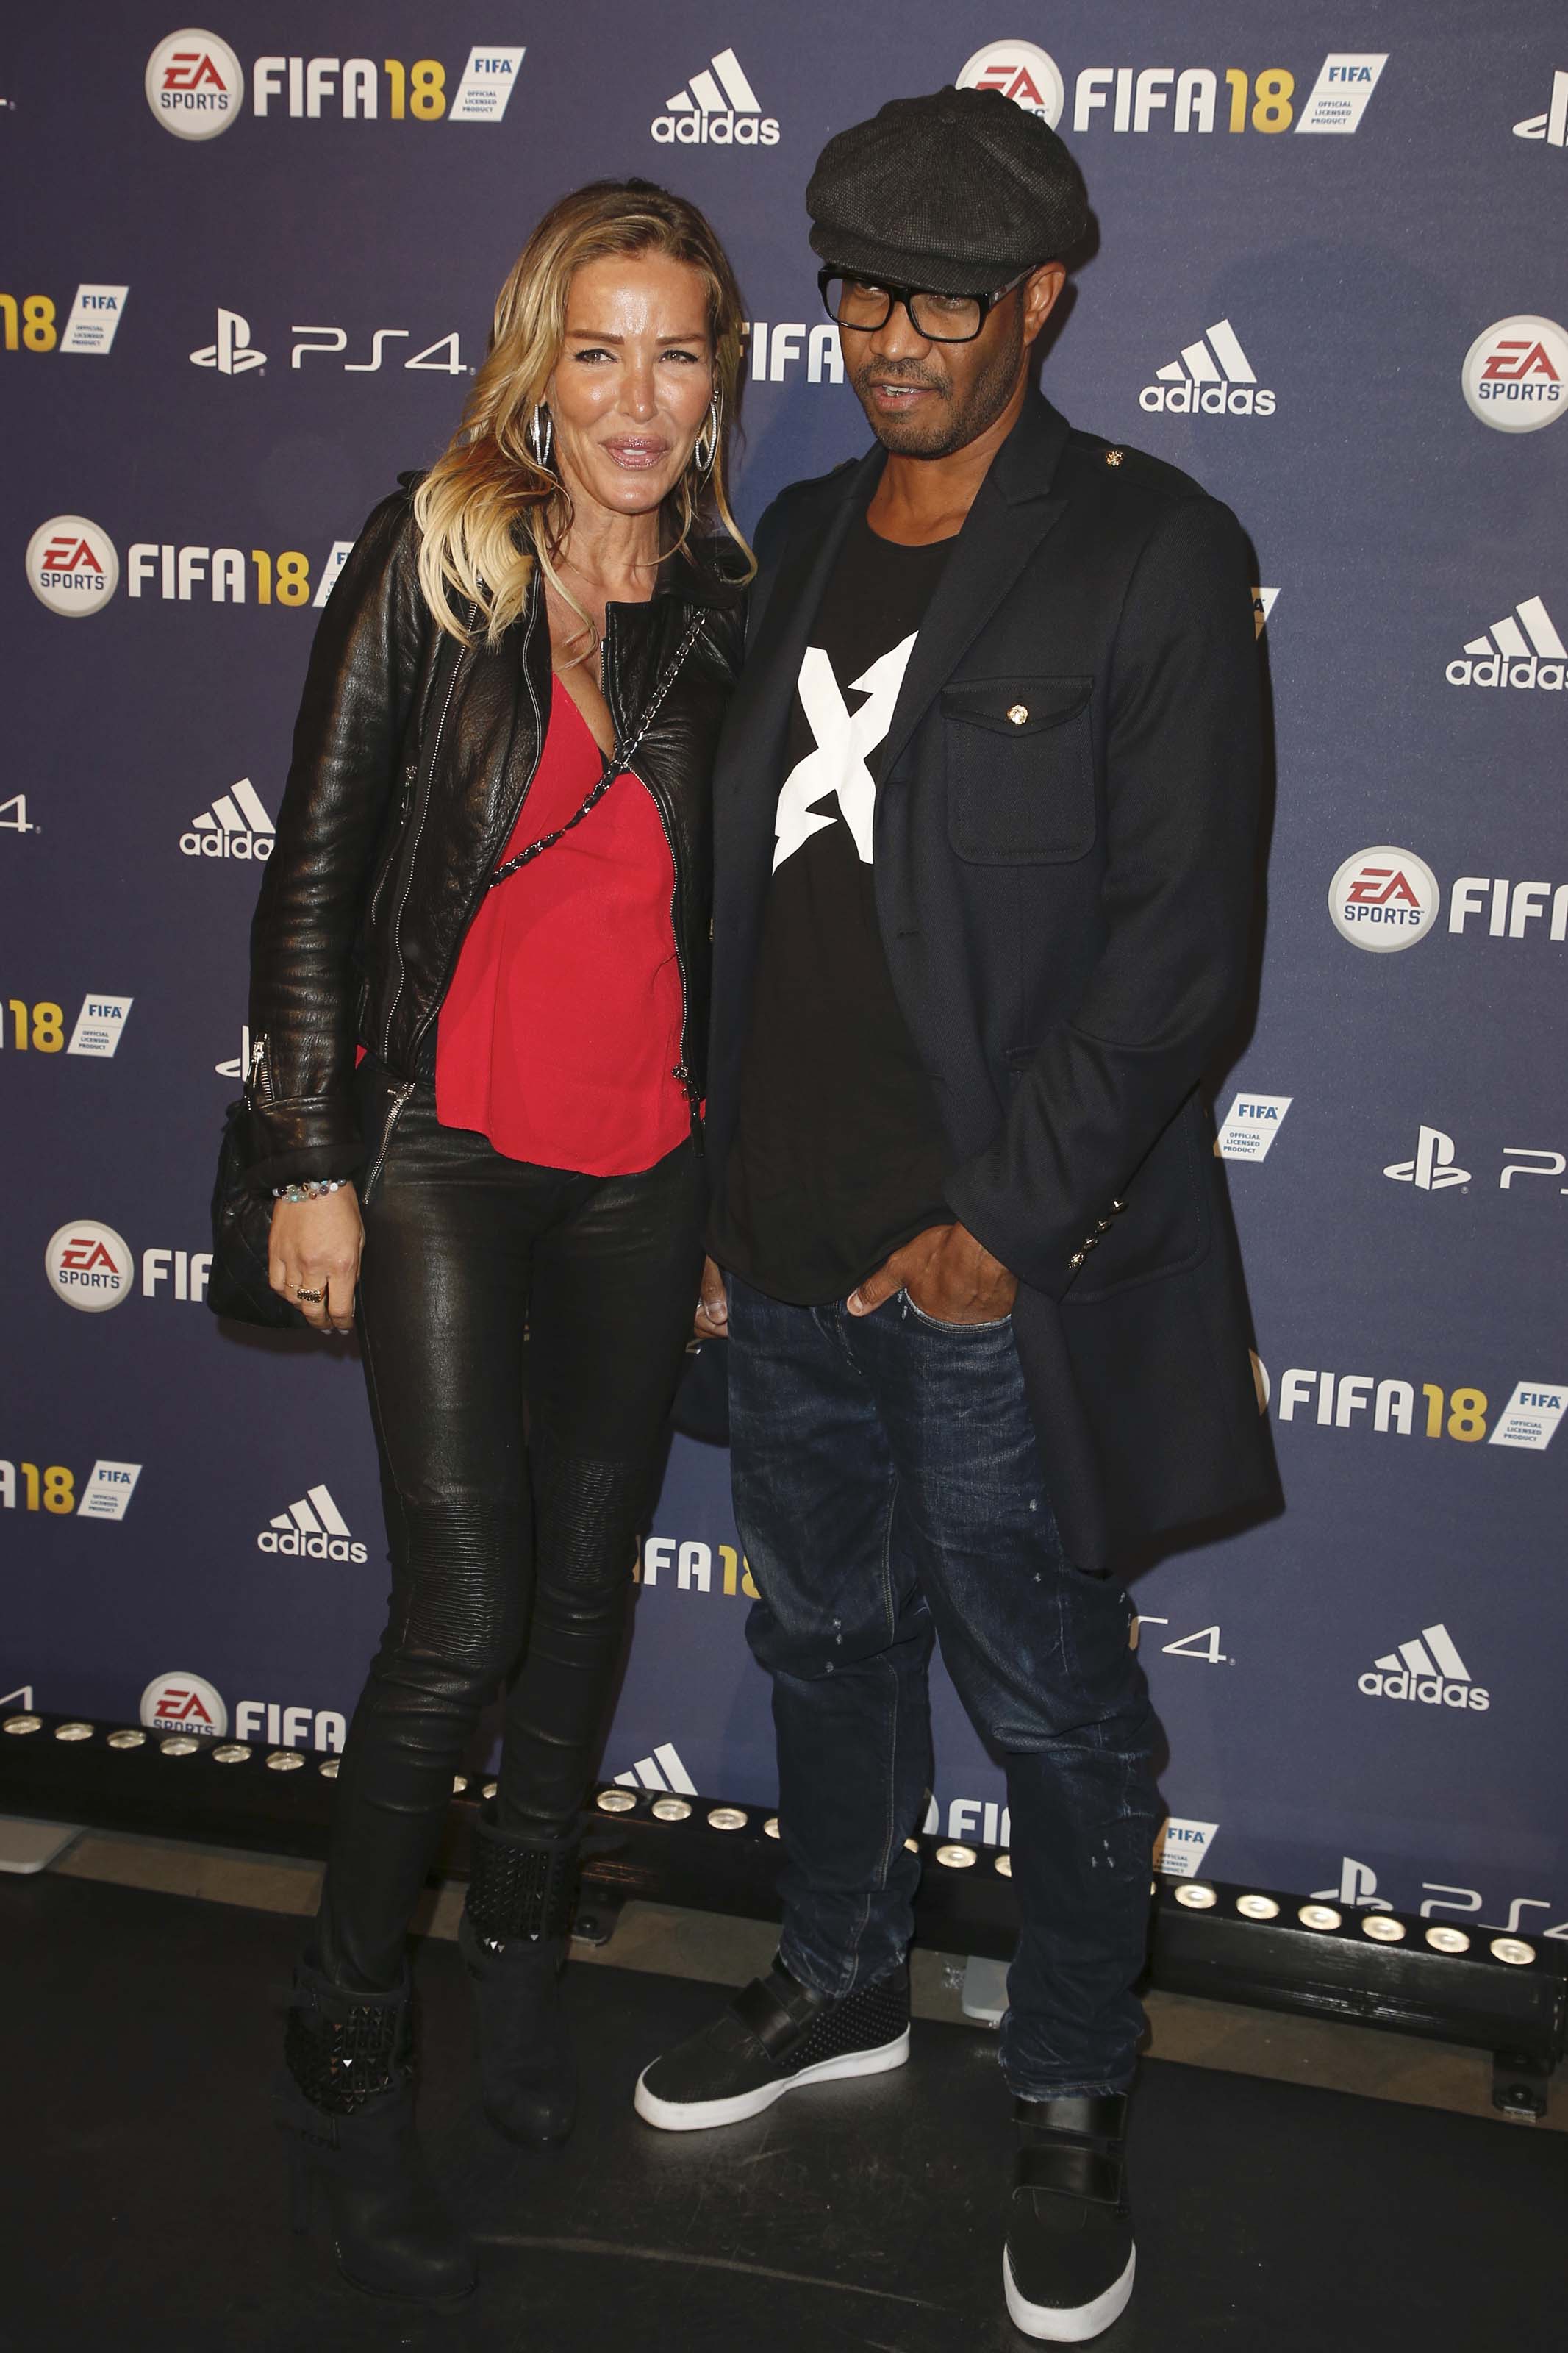 Ophelie Winter attends FIFA 2018 game launch party